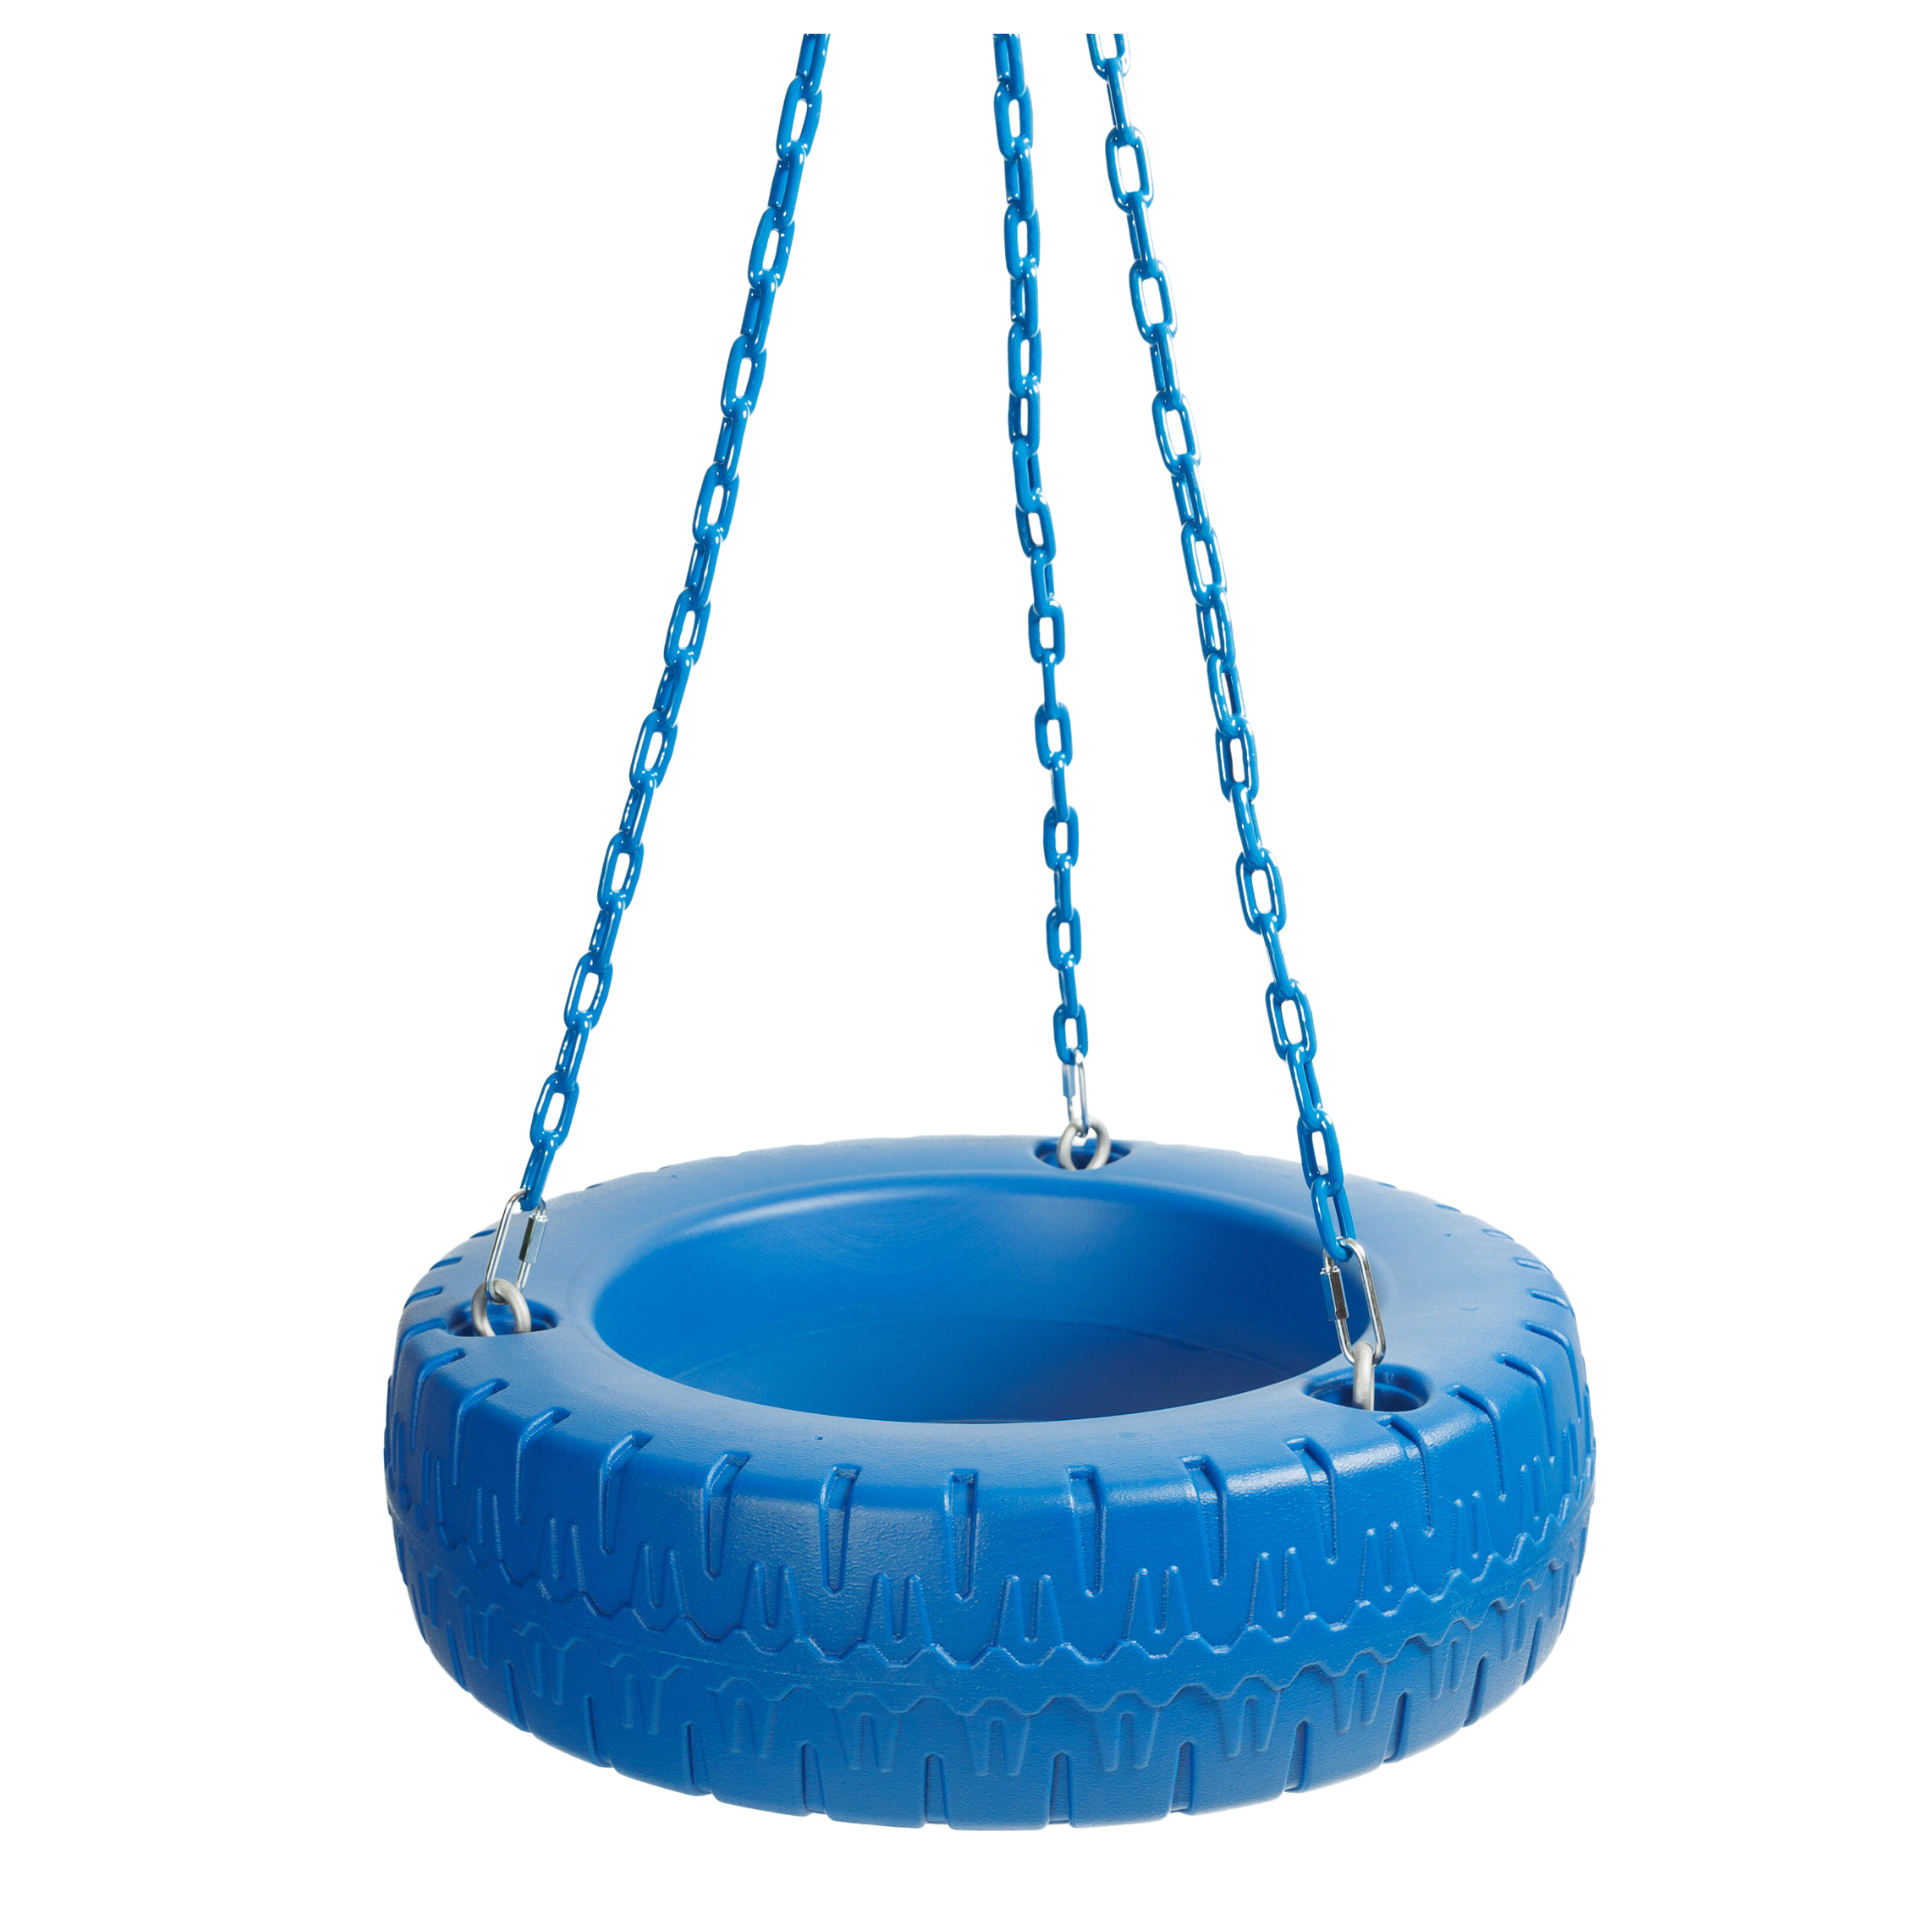 Heavy Duty Tire Swivel For 3 Chain Swing | Safe Brackets & Hardware For  Your Playset